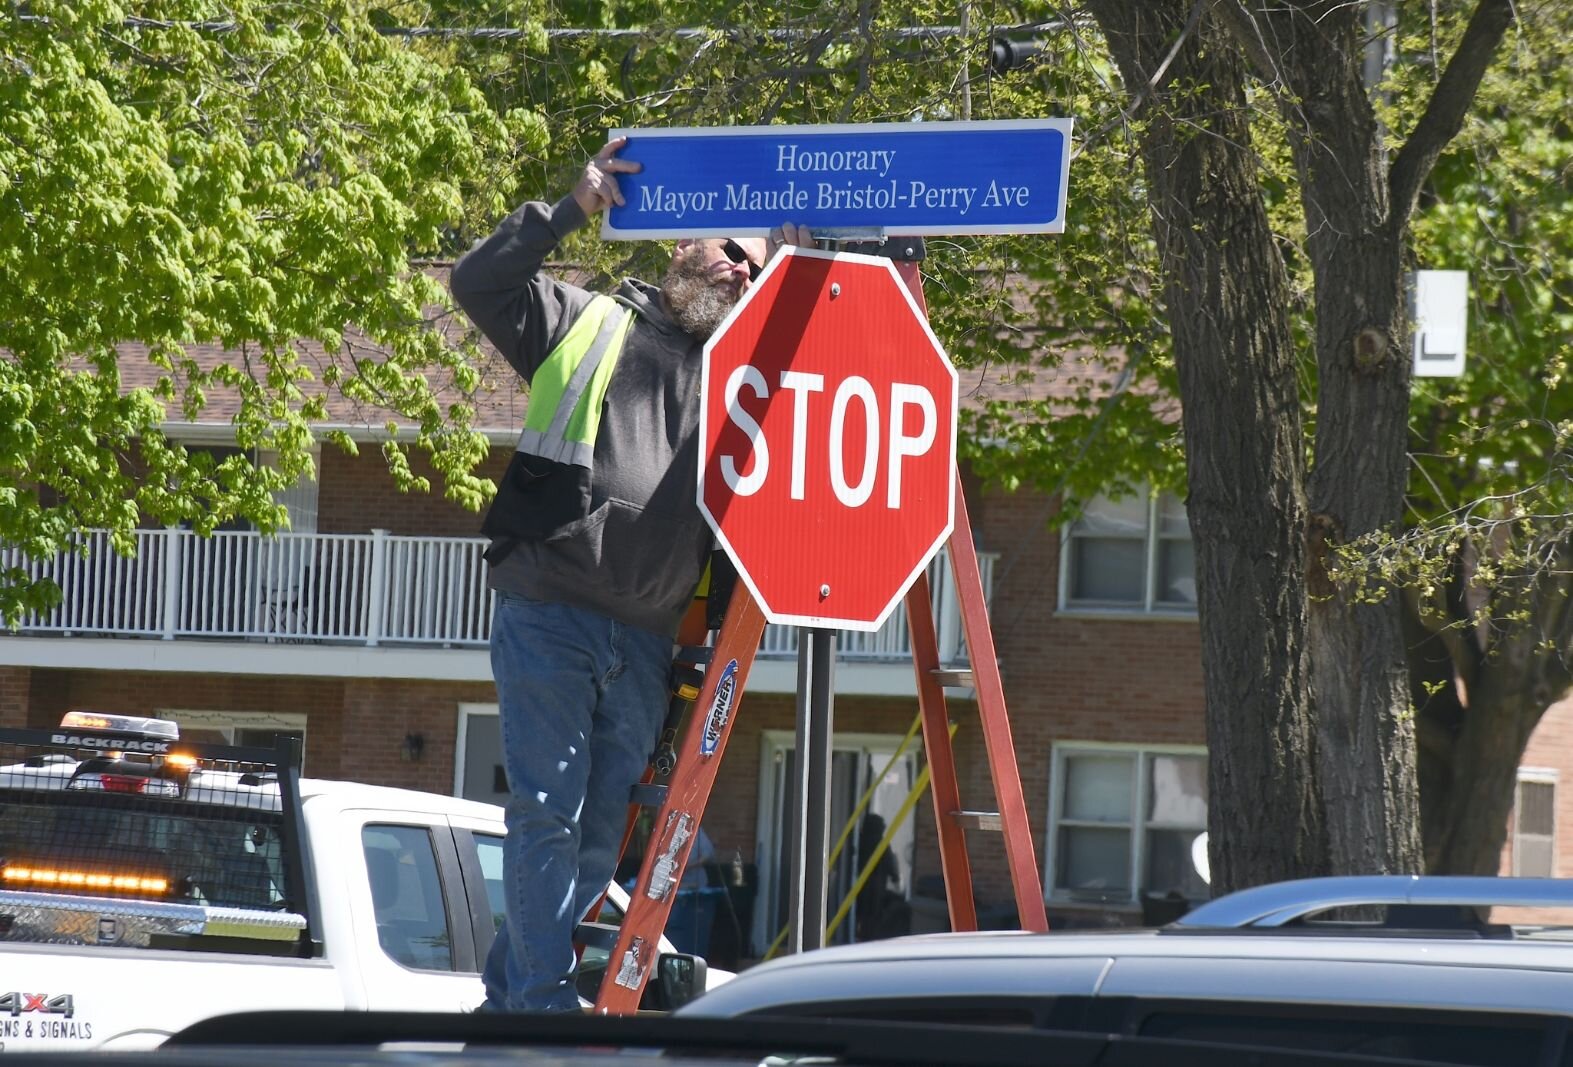 Joe Wright of the City of Battle Creek puts up the sign unveiling Honorary Mayor Maude Bristol-Perry Avenue.